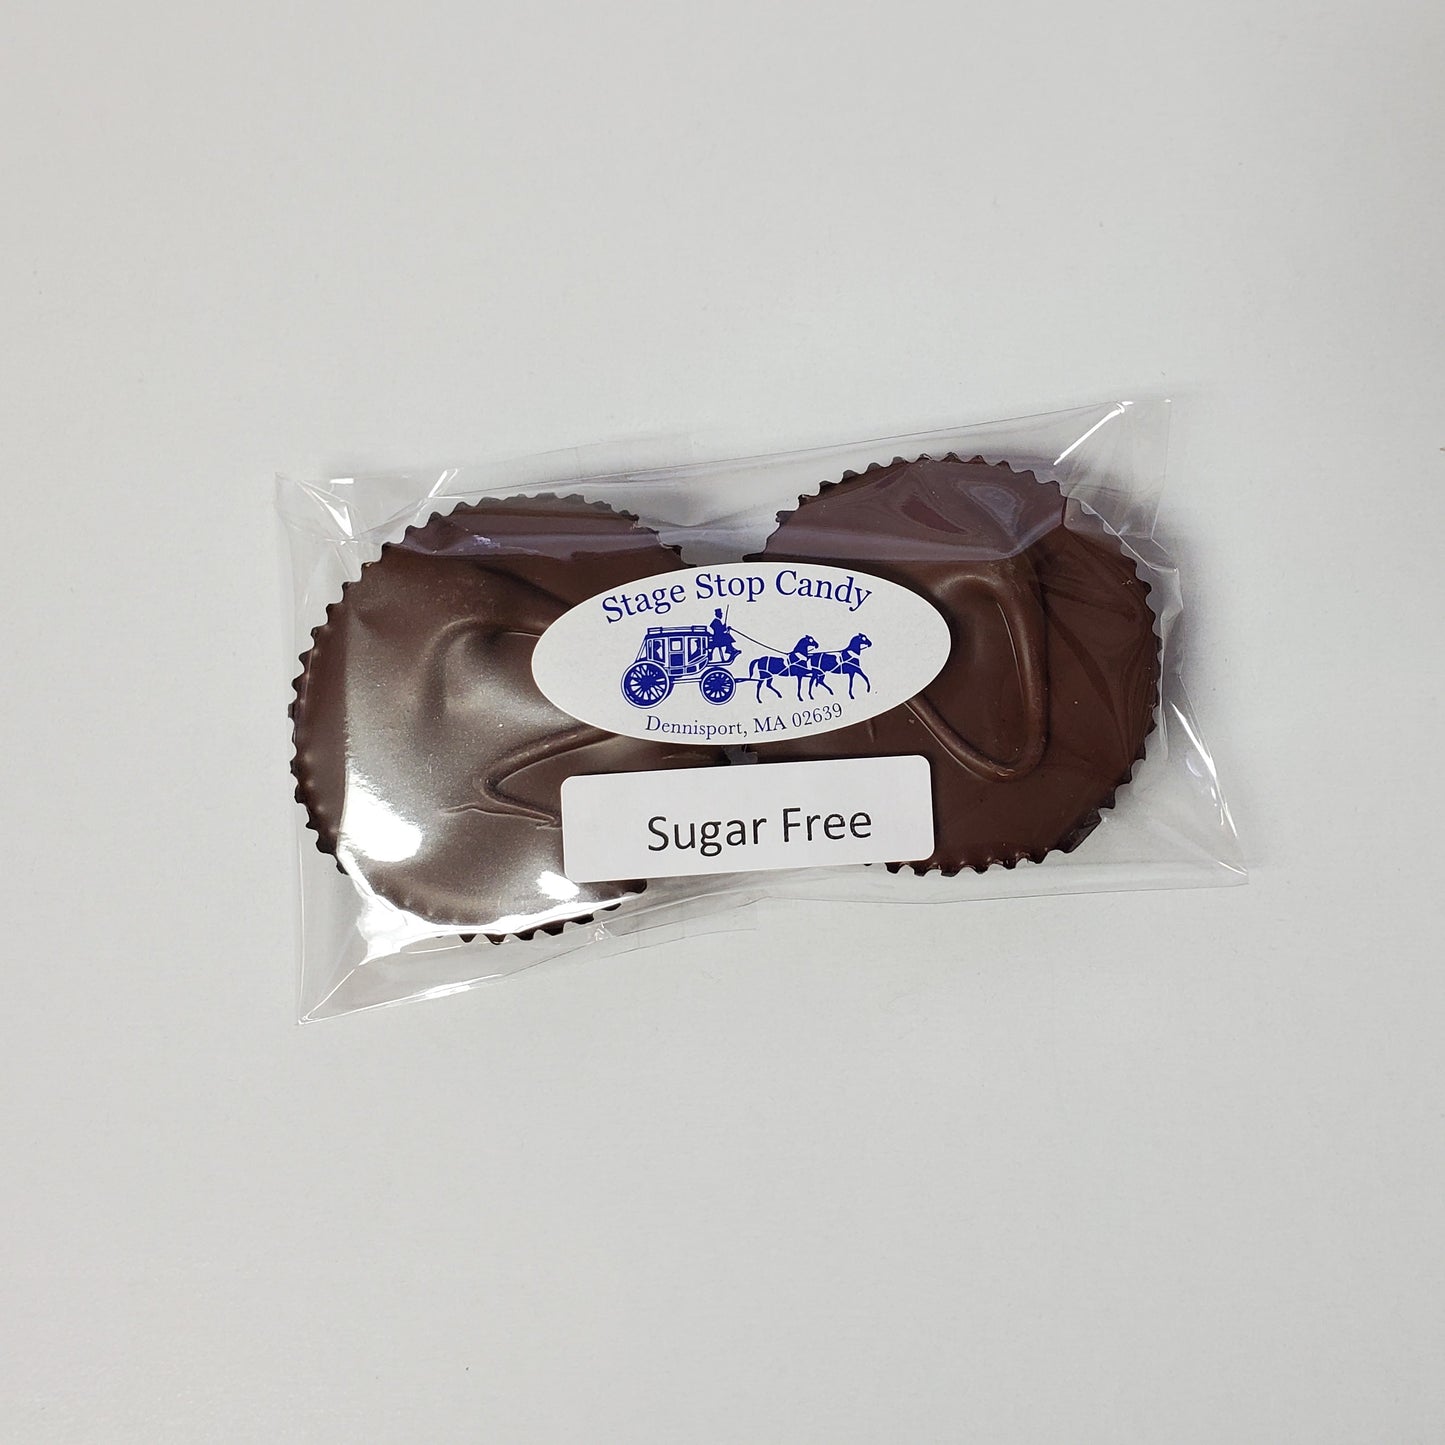 Sugar Free Peanut Butter Cups from Stage Stop Candy